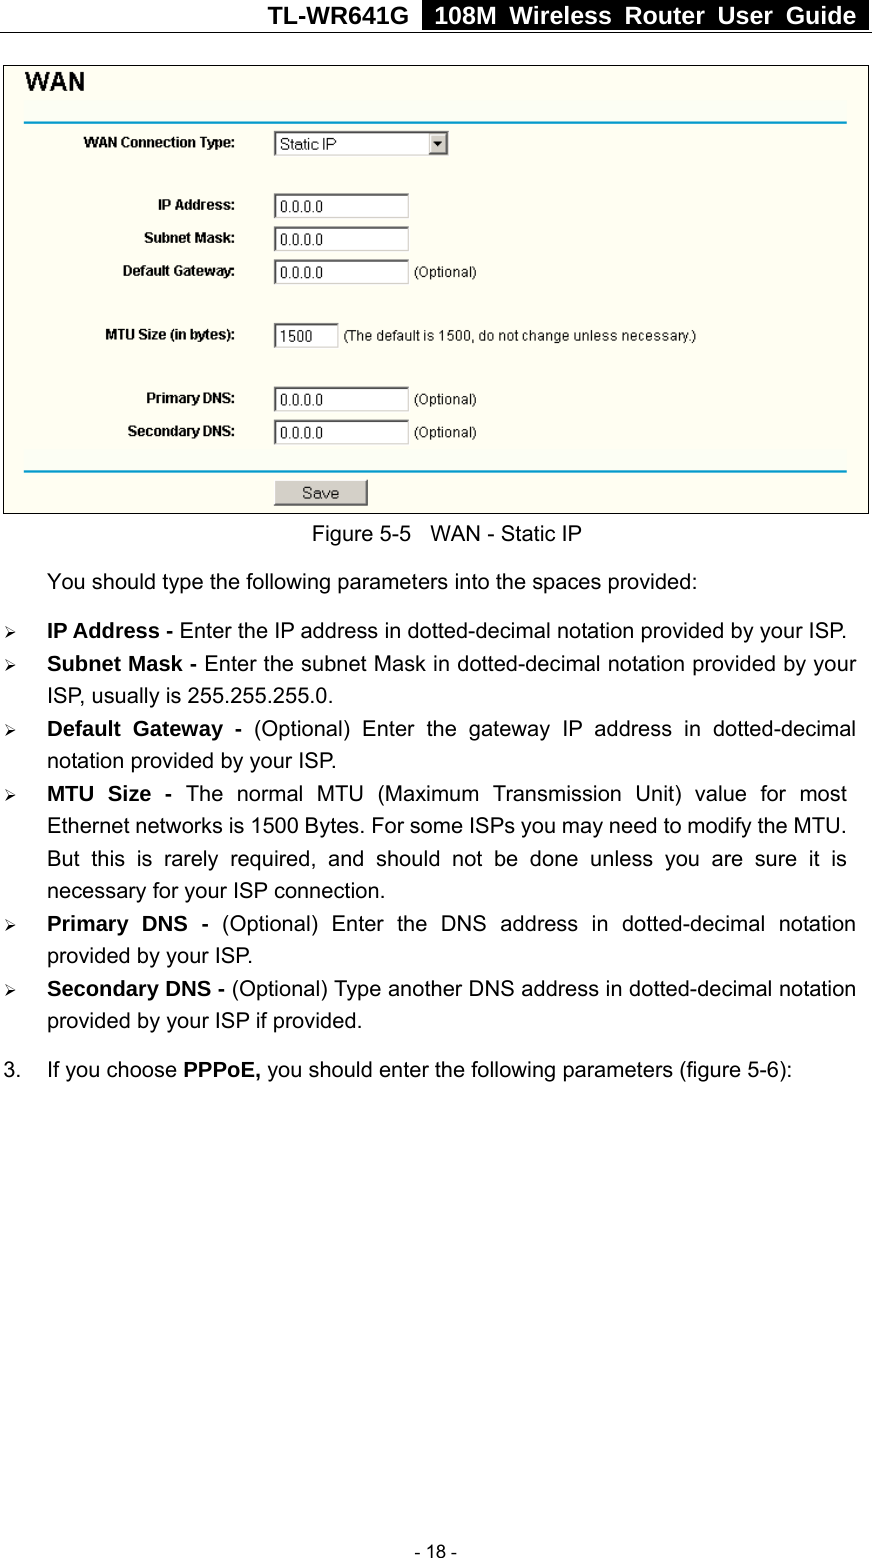 TL-WR641G   108M Wireless Router User Guide   Figure 5-5  WAN - Static IP You should type the following parameters into the spaces provided: ¾ IP Address - Enter the IP address in dotted-decimal notation provided by your ISP. ¾ Subnet Mask - Enter the subnet Mask in dotted-decimal notation provided by your ISP, usually is 255.255.255.0. ¾ Default Gateway - (Optional) Enter the gateway IP address in dotted-decimal notation provided by your ISP. ¾ MTU Size - The normal MTU (Maximum Transmission Unit) value for most Ethernet networks is 1500 Bytes. For some ISPs you may need to modify the MTU. But this is rarely required, and should not be done unless you are sure it is necessary for your ISP connection. ¾ Primary DNS - (Optional) Enter the DNS address in dotted-decimal notation provided by your ISP. ¾ Secondary DNS - (Optional) Type another DNS address in dotted-decimal notation provided by your ISP if provided. 3.  If you choose PPPoE, you should enter the following parameters (figure 5-6):    - 18 - 